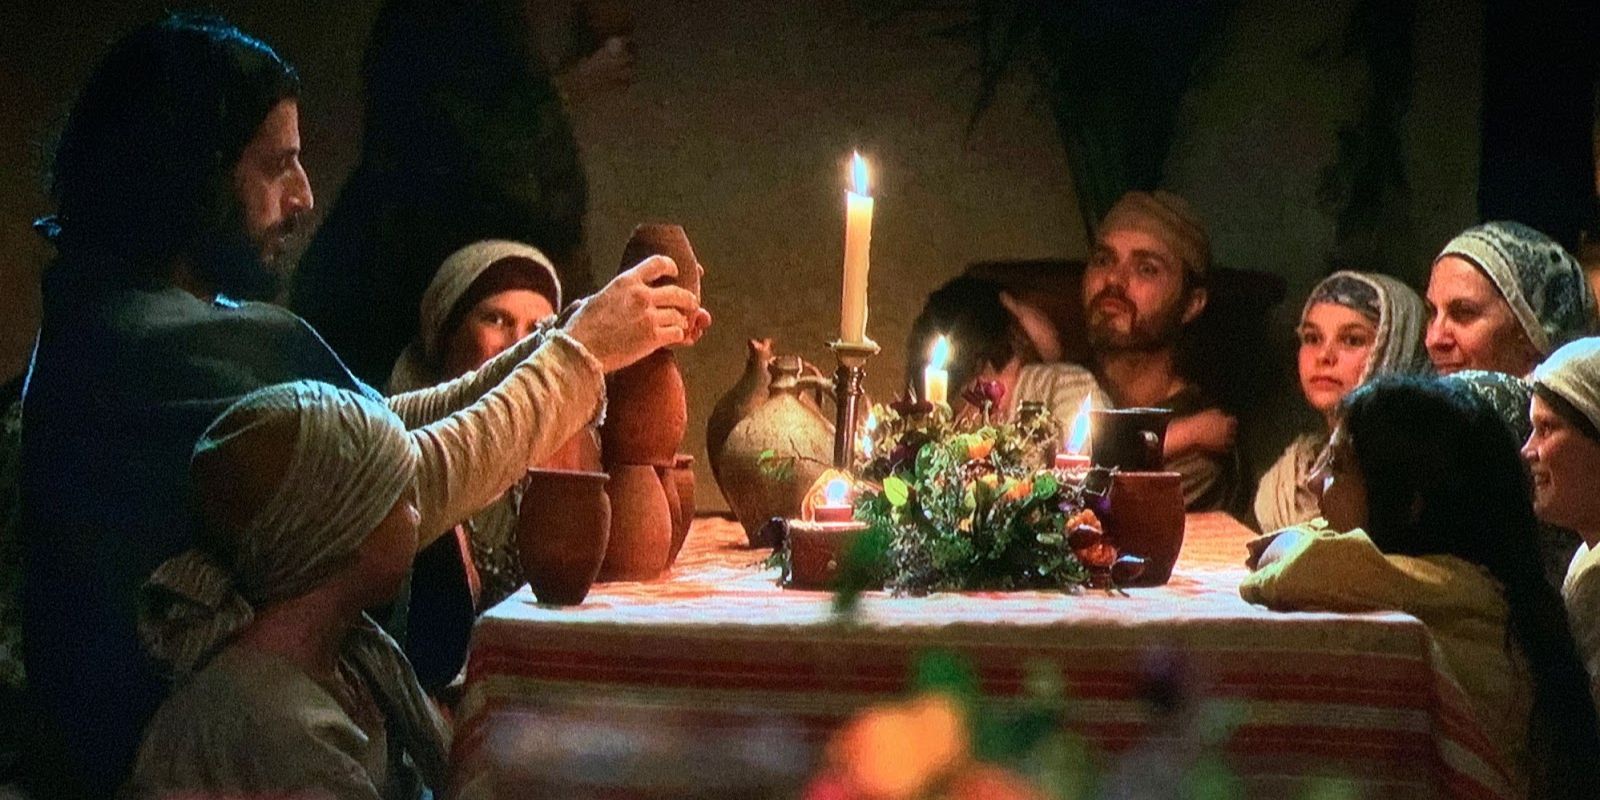 Jesus_at_the_table_with_the_family_The_chosen